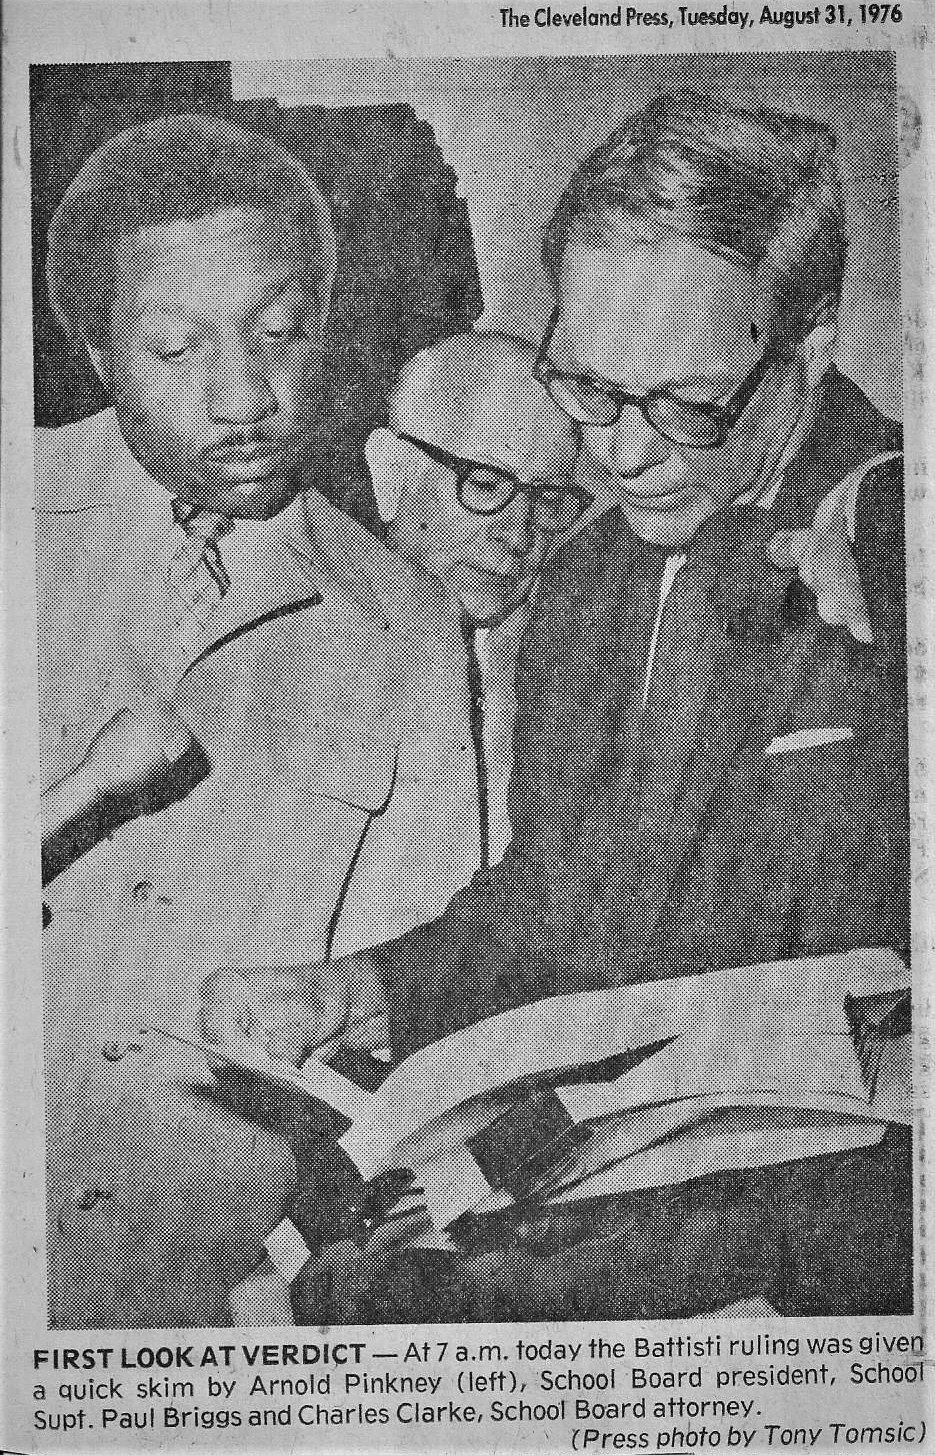 THE VERDICT. Judge Battisti’s verdict on the school’s desegregation case came in shopping carts at the federal courthouse, and cost $50 each. The Press recorded the moment the first one was delivered at 7am at the courthouse, and was opened by School Board President Arnold Pinkney (left), Schools Supt Paul W. Briggs and board chief attorney Charles Clarke.